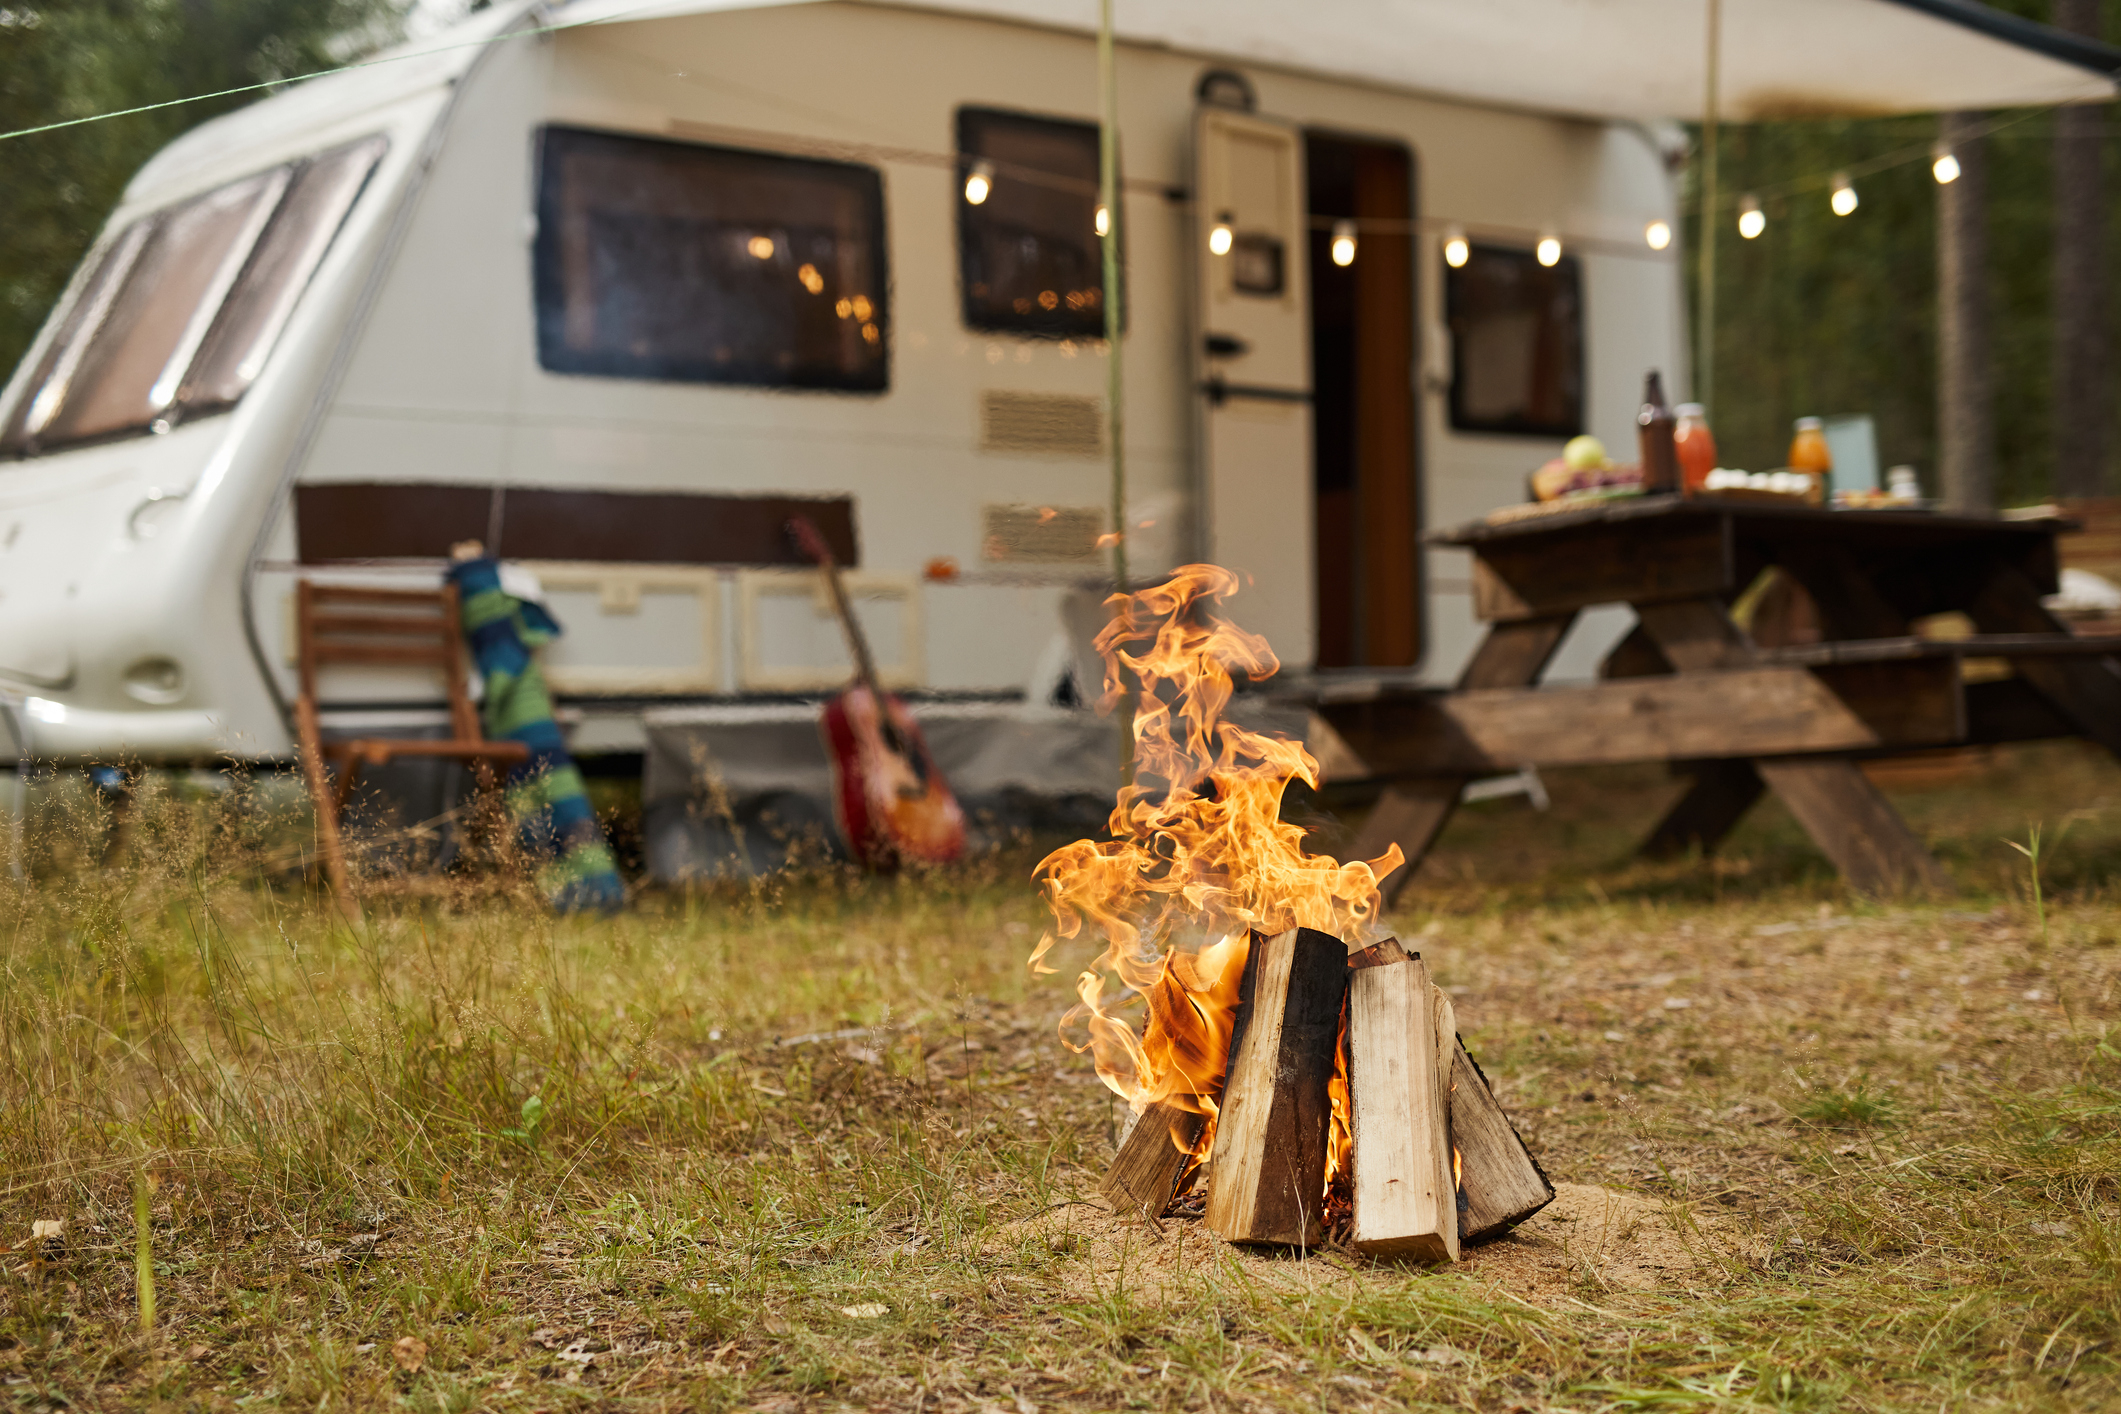 Background image of campfire in forest with trailer van in background